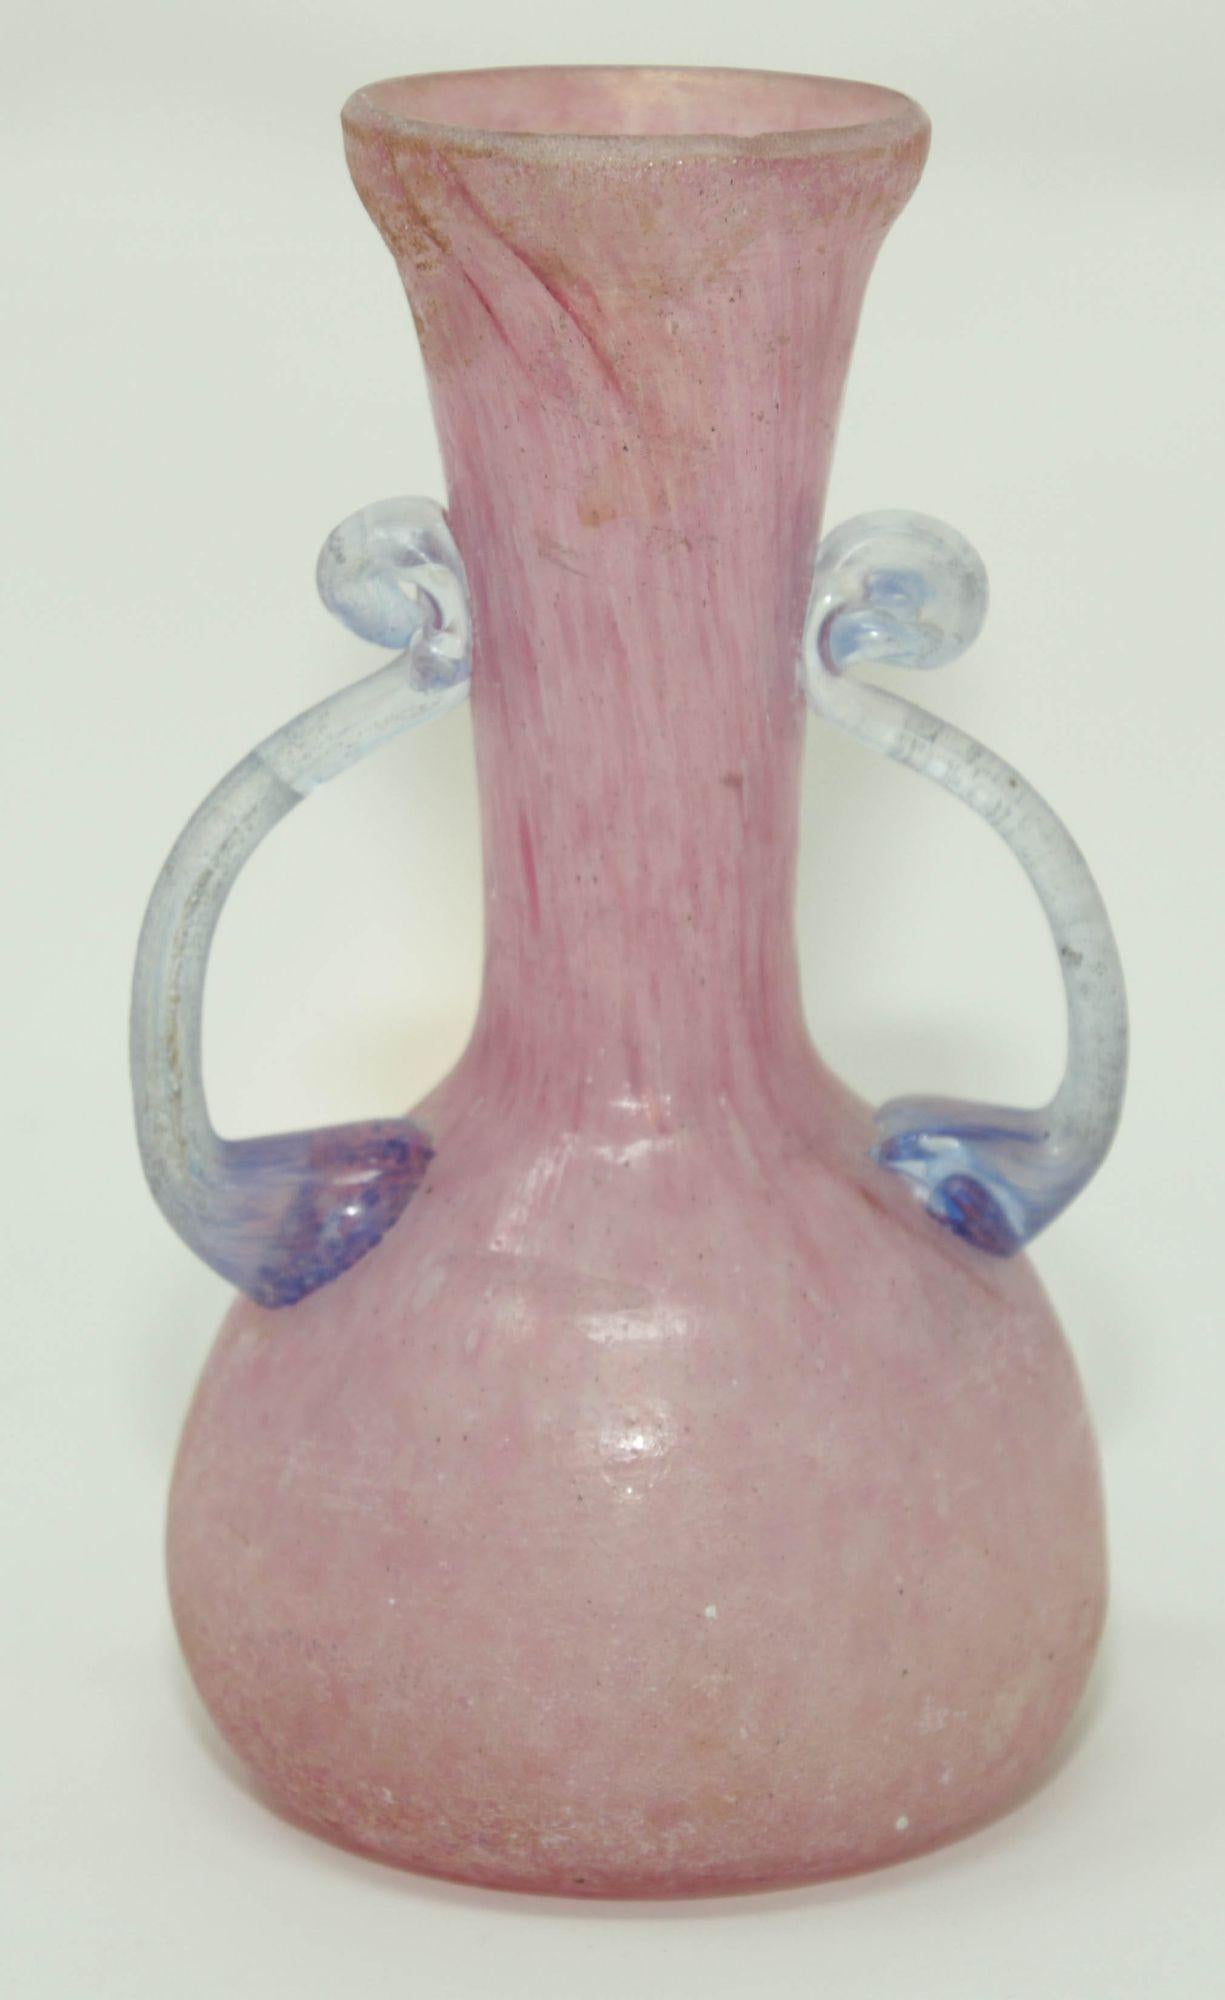 Murano Pink and Blue Scavo Art Glass Seguso Vetri d'Arte Murano, Italy, 1960s
Murano small vase in pink glass with blue handles, very delicate work with beautiful iridescent reflections on the whole vase and a beautiful transparency on the handles.